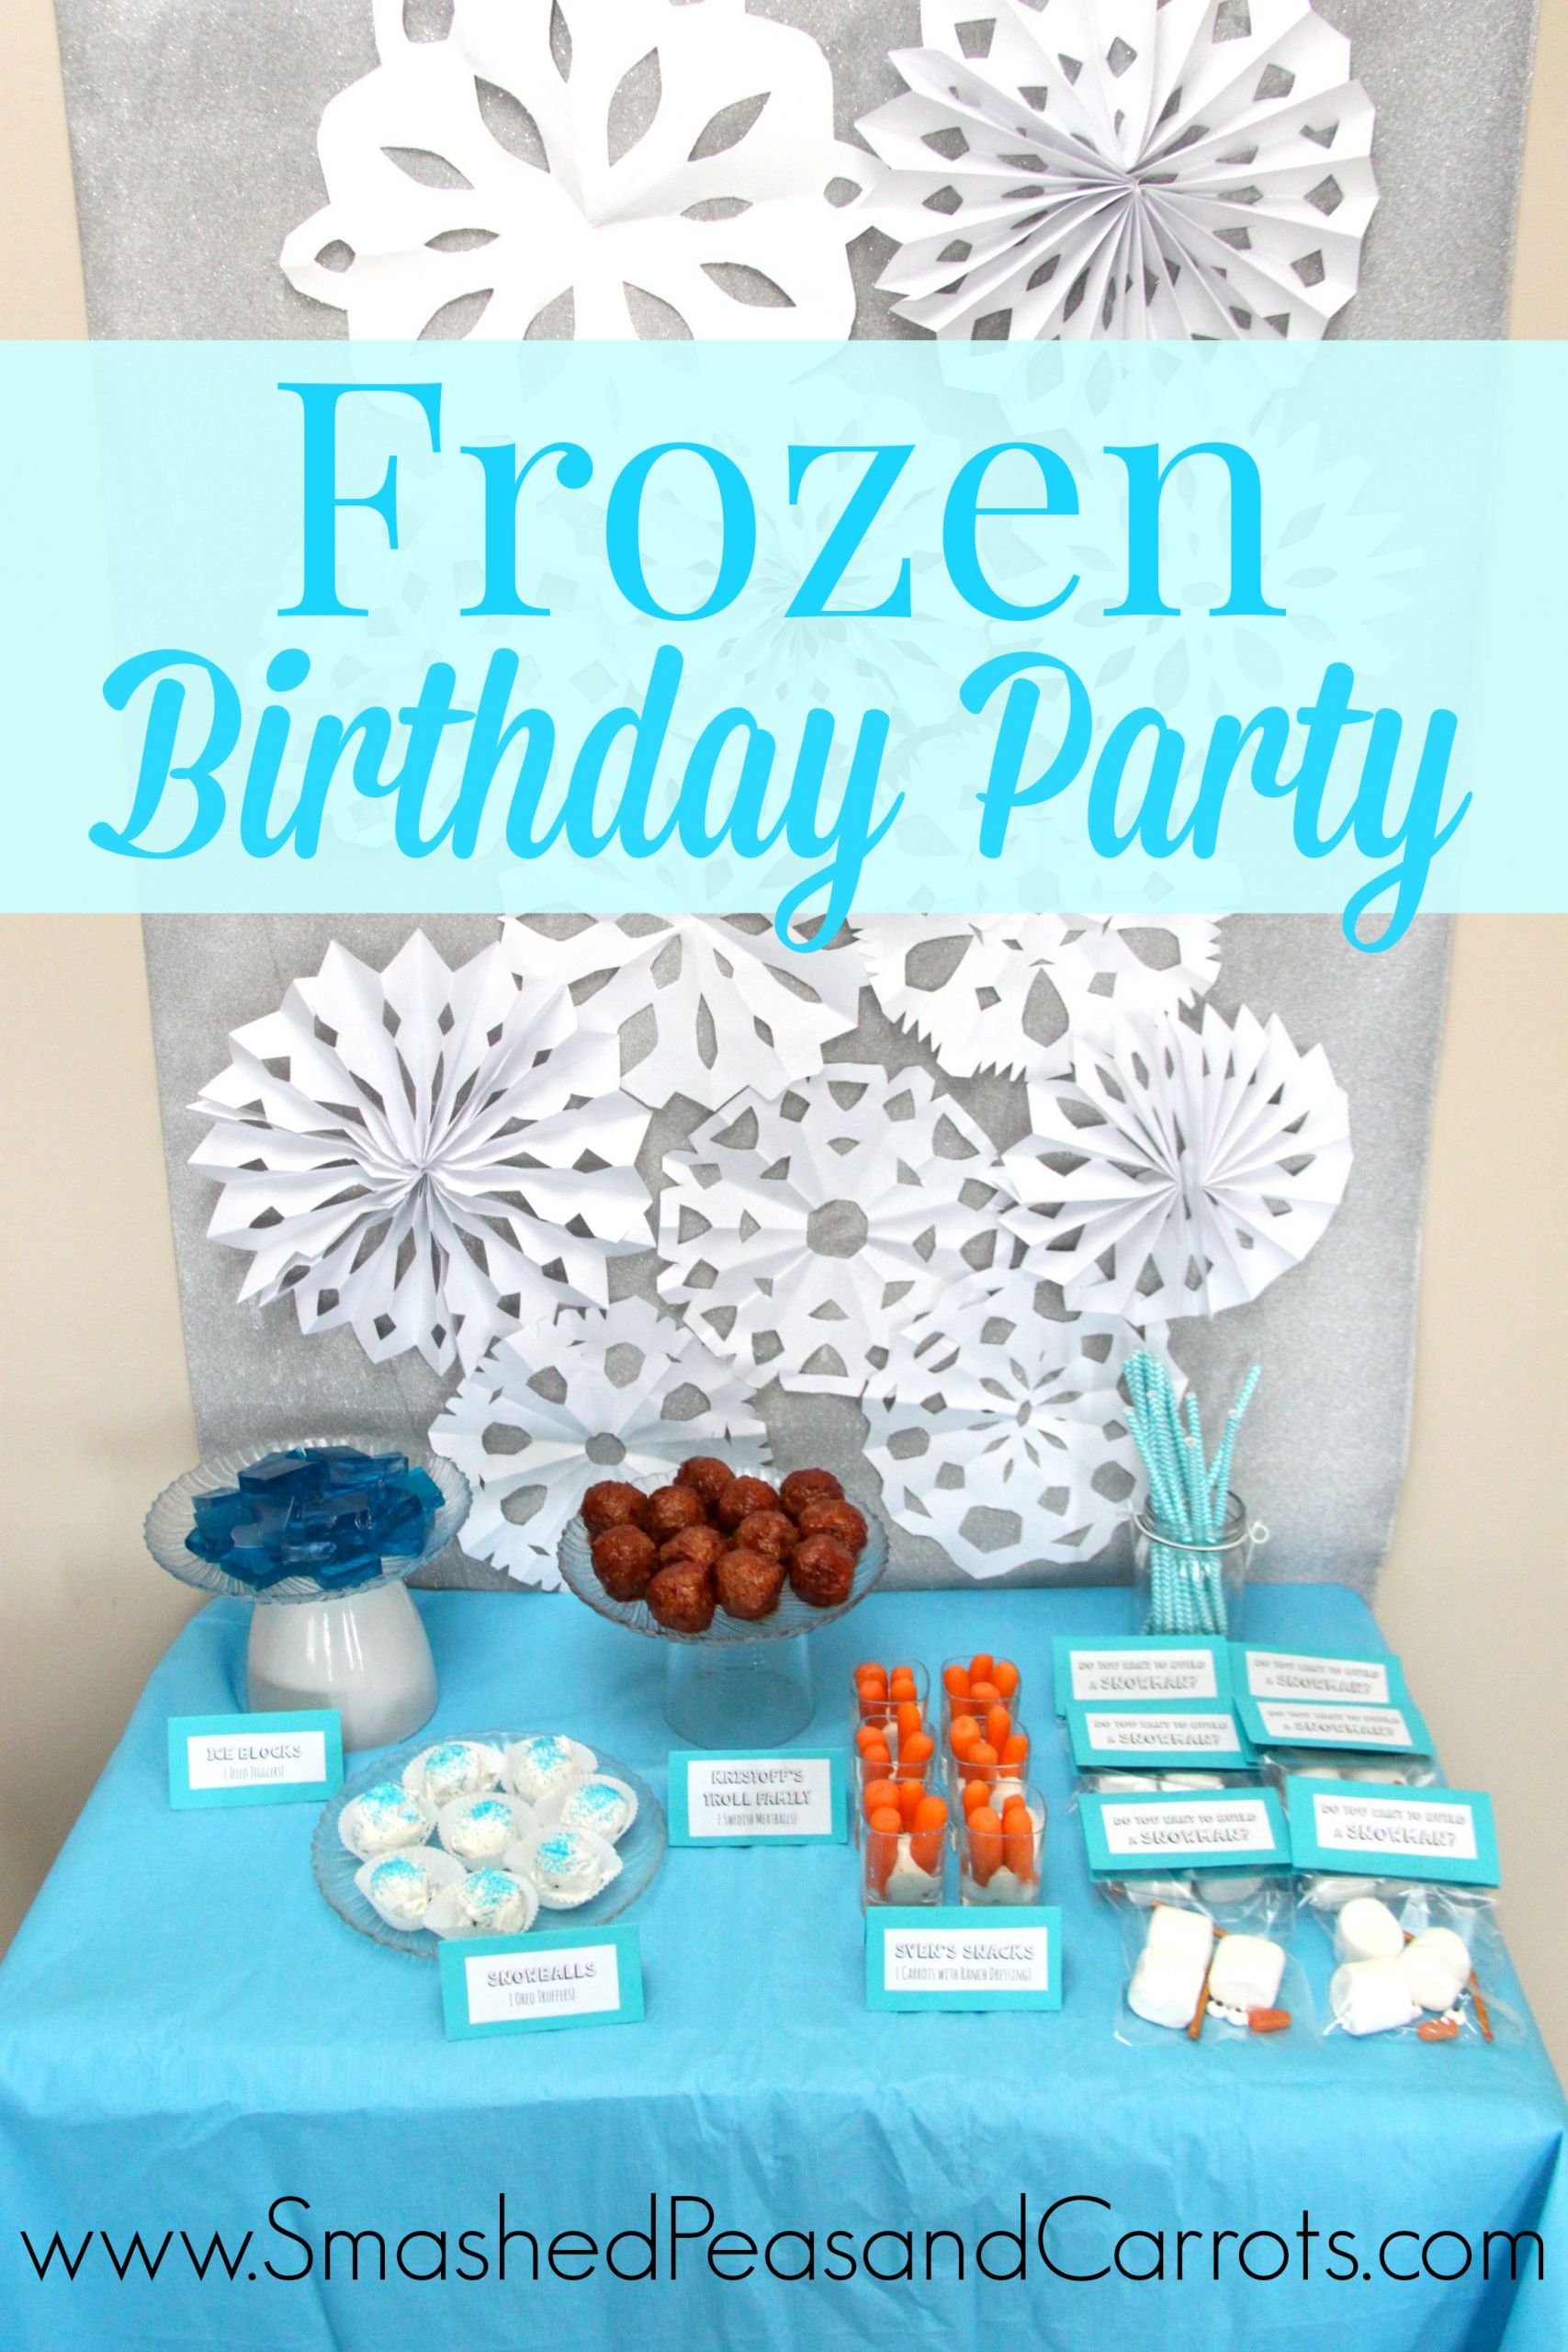 Free Birthday Party Ideas
 Eloise s Frozen Birthday Party with FREE Printables